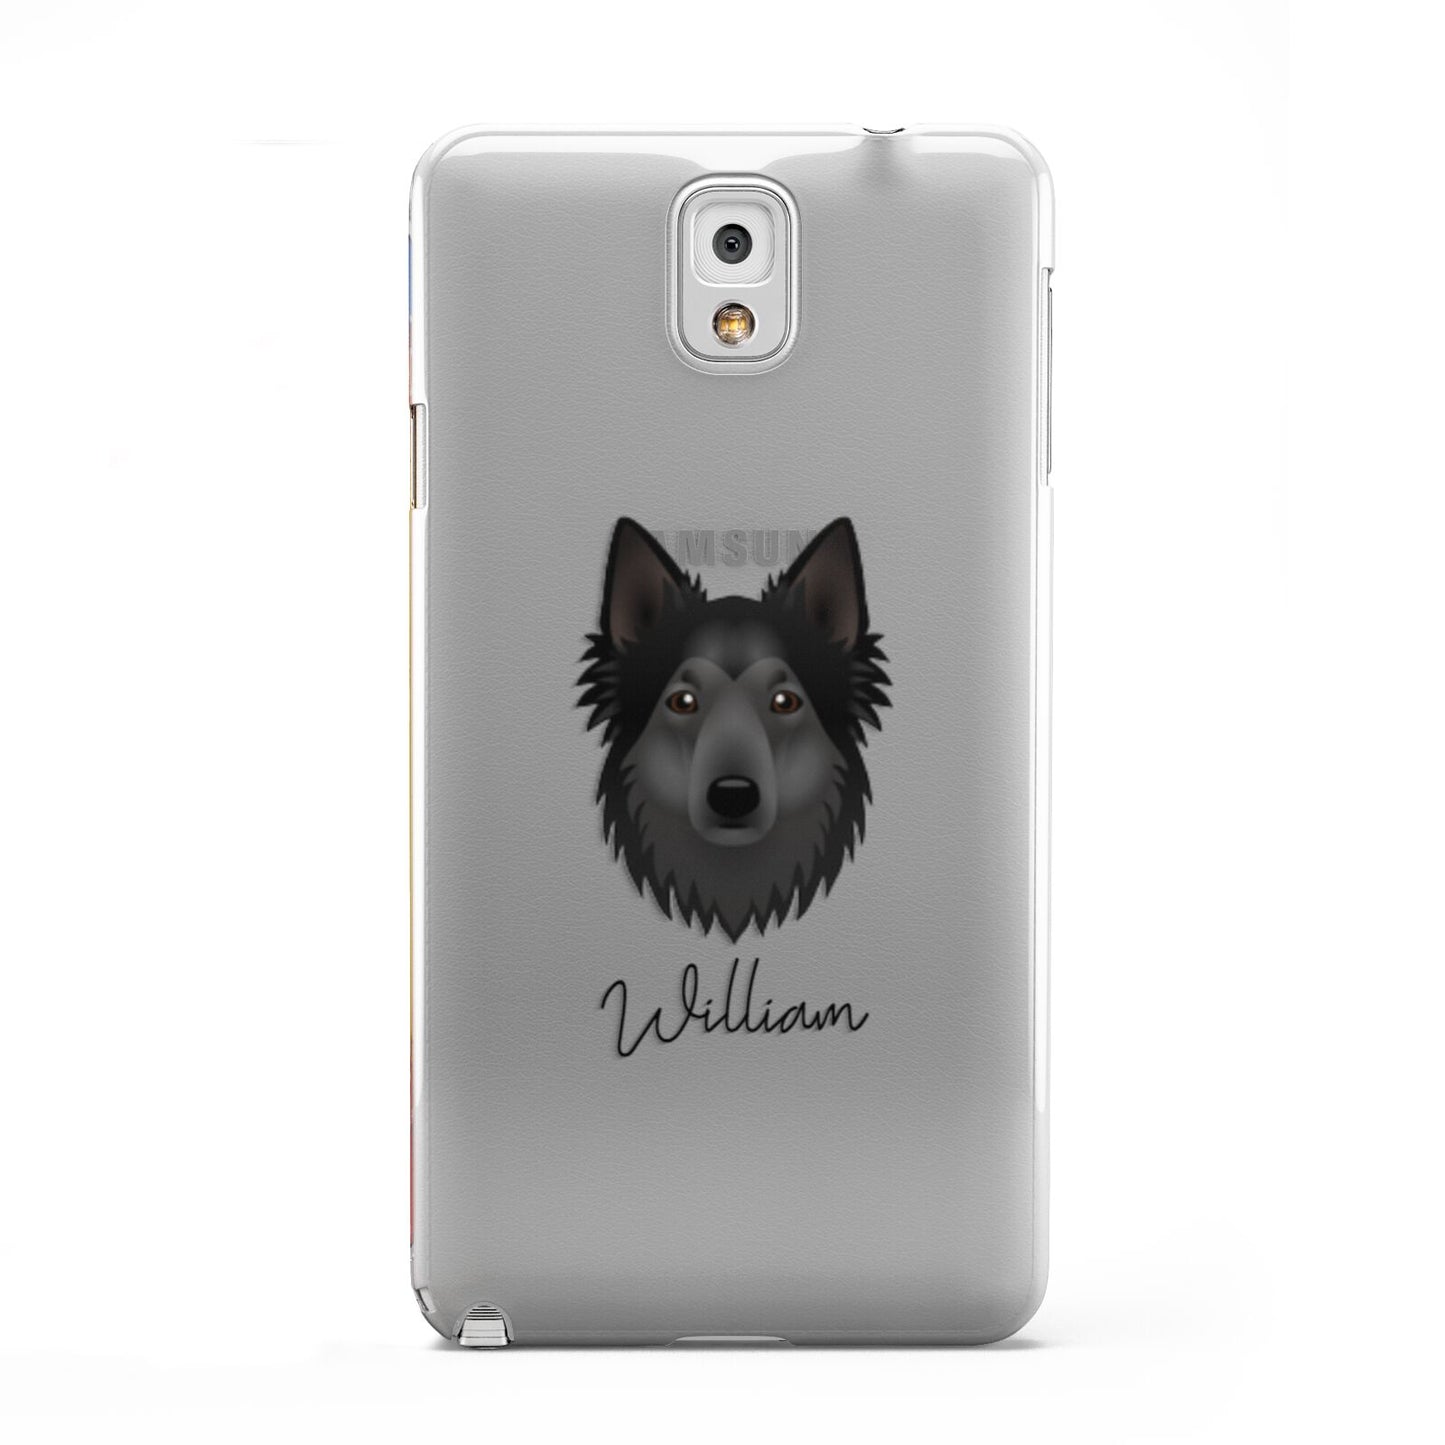 Shollie Personalised Samsung Galaxy Note 3 Case